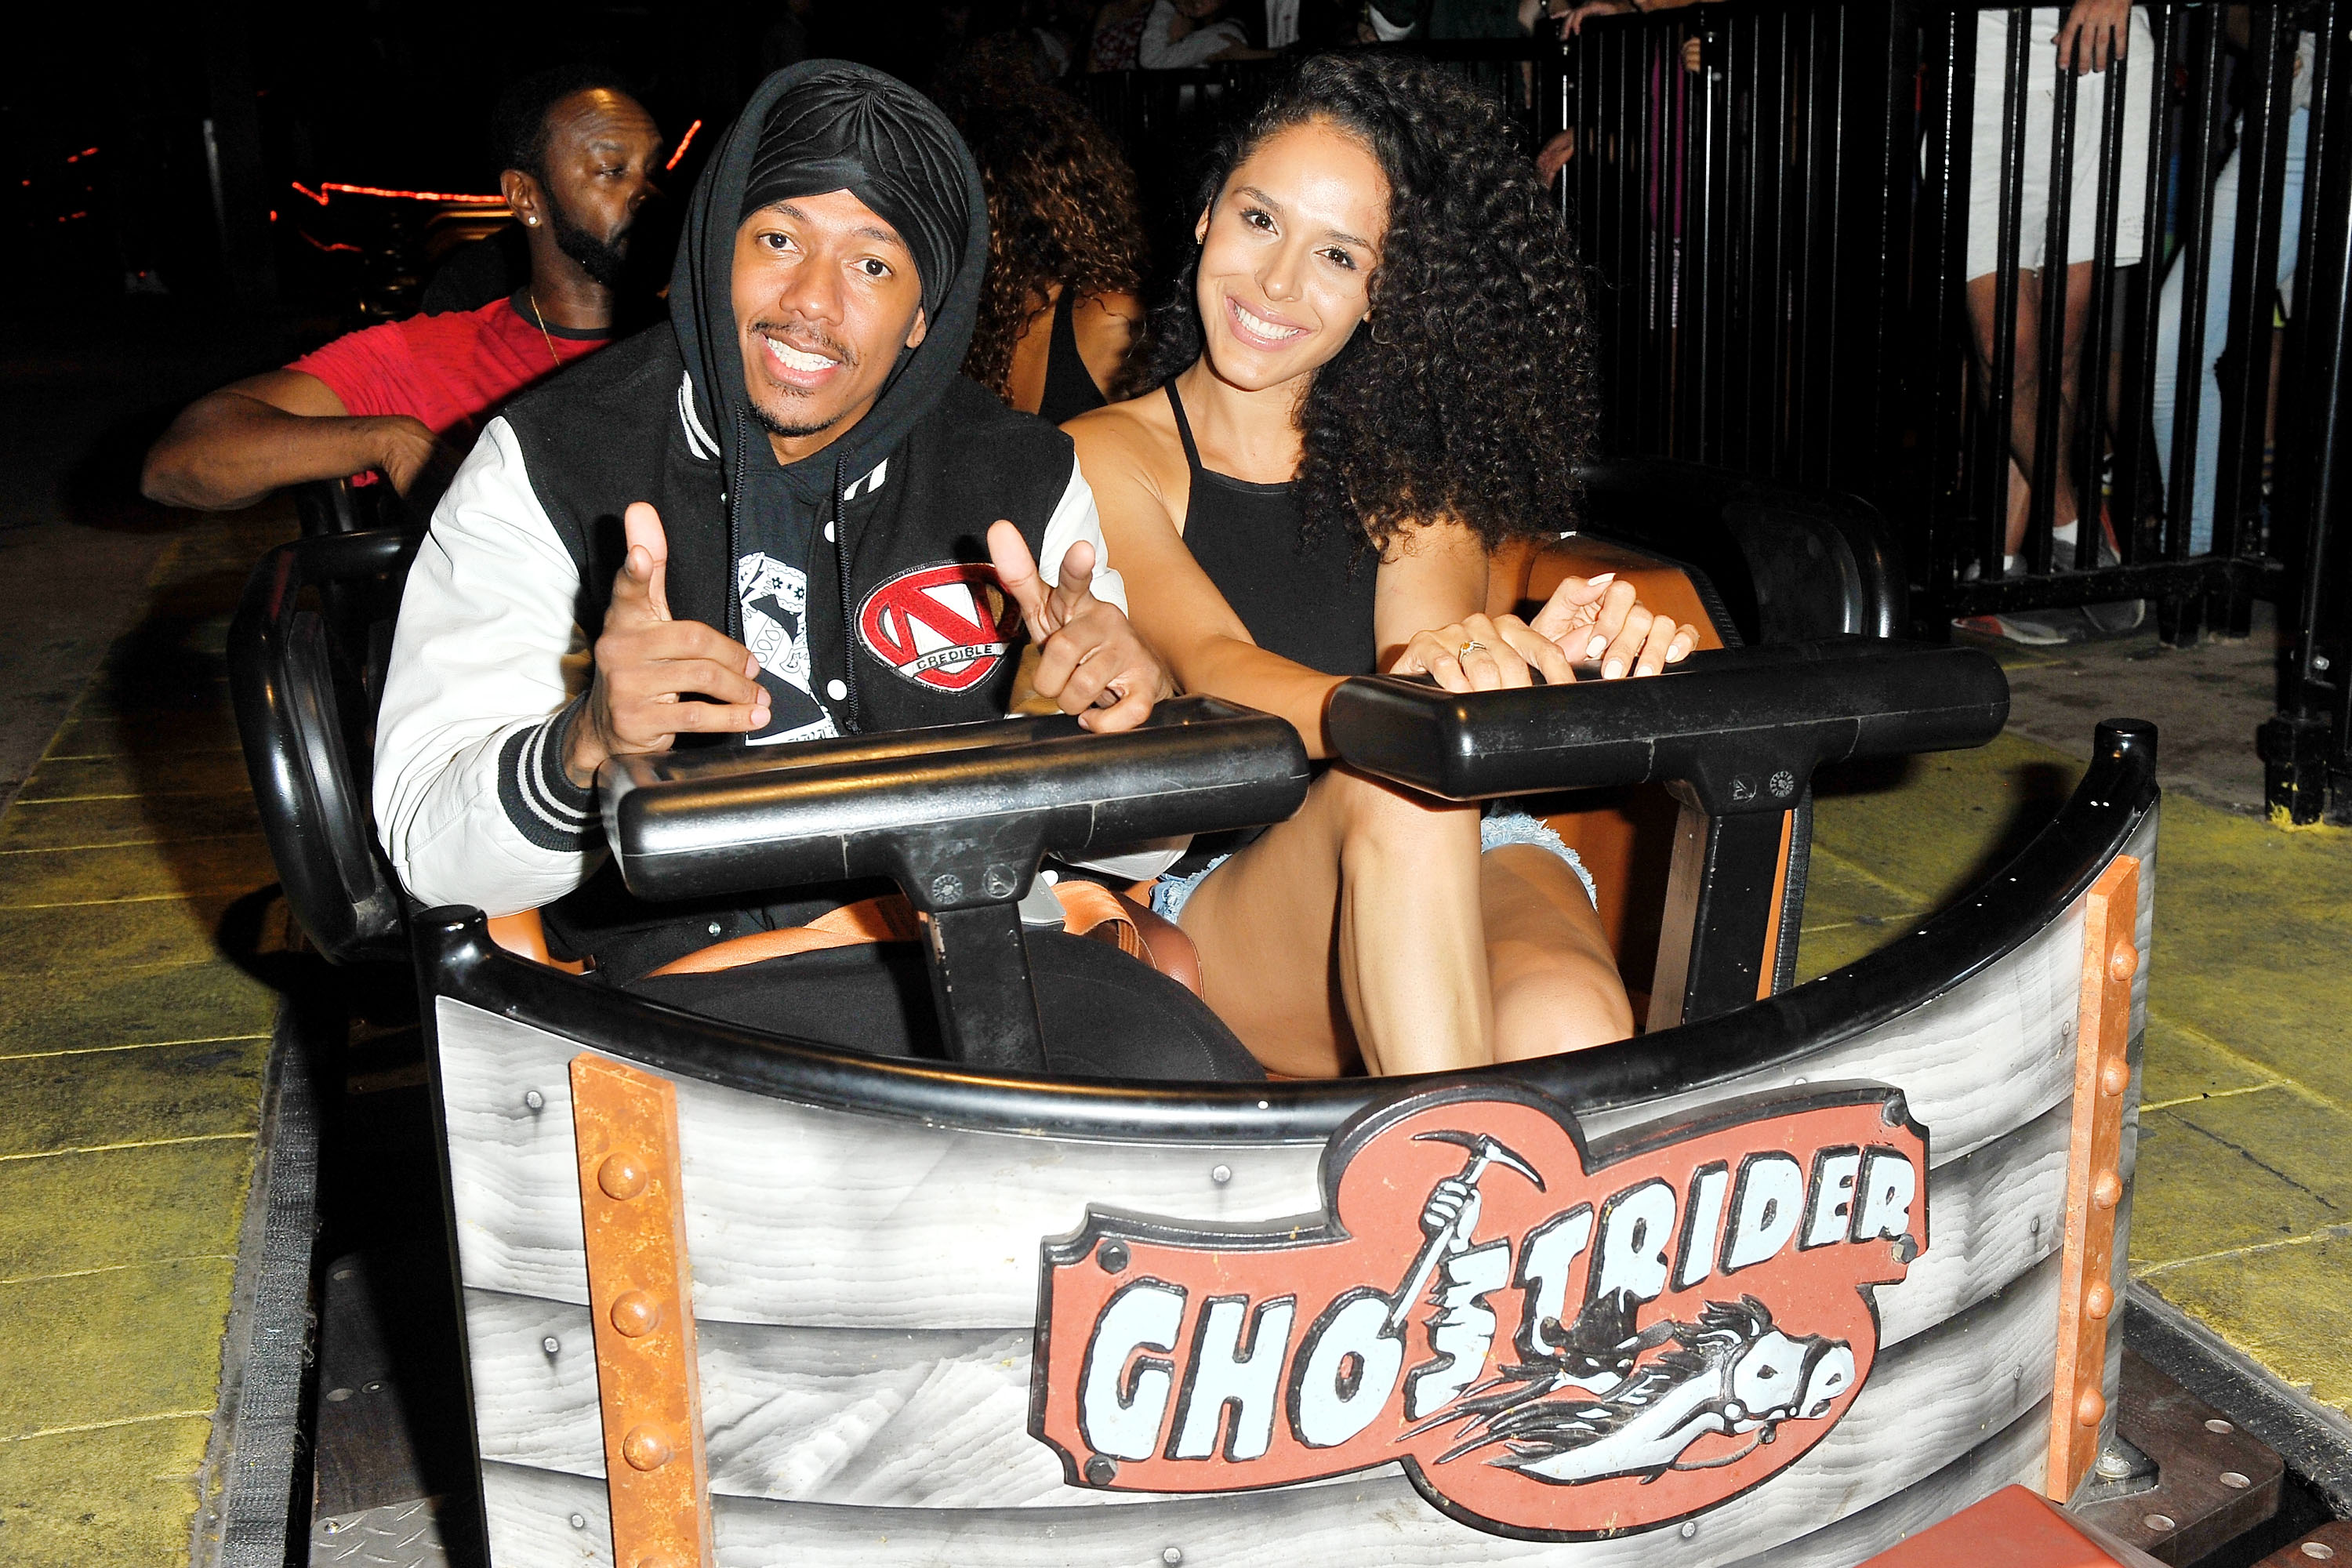 Nick Cannon and Brittany Bell on the 'Ghostrider' Roller Coaster at Knott's Berry Farm, Buena Park, California, September 1, 2017 | Source: Getty Images